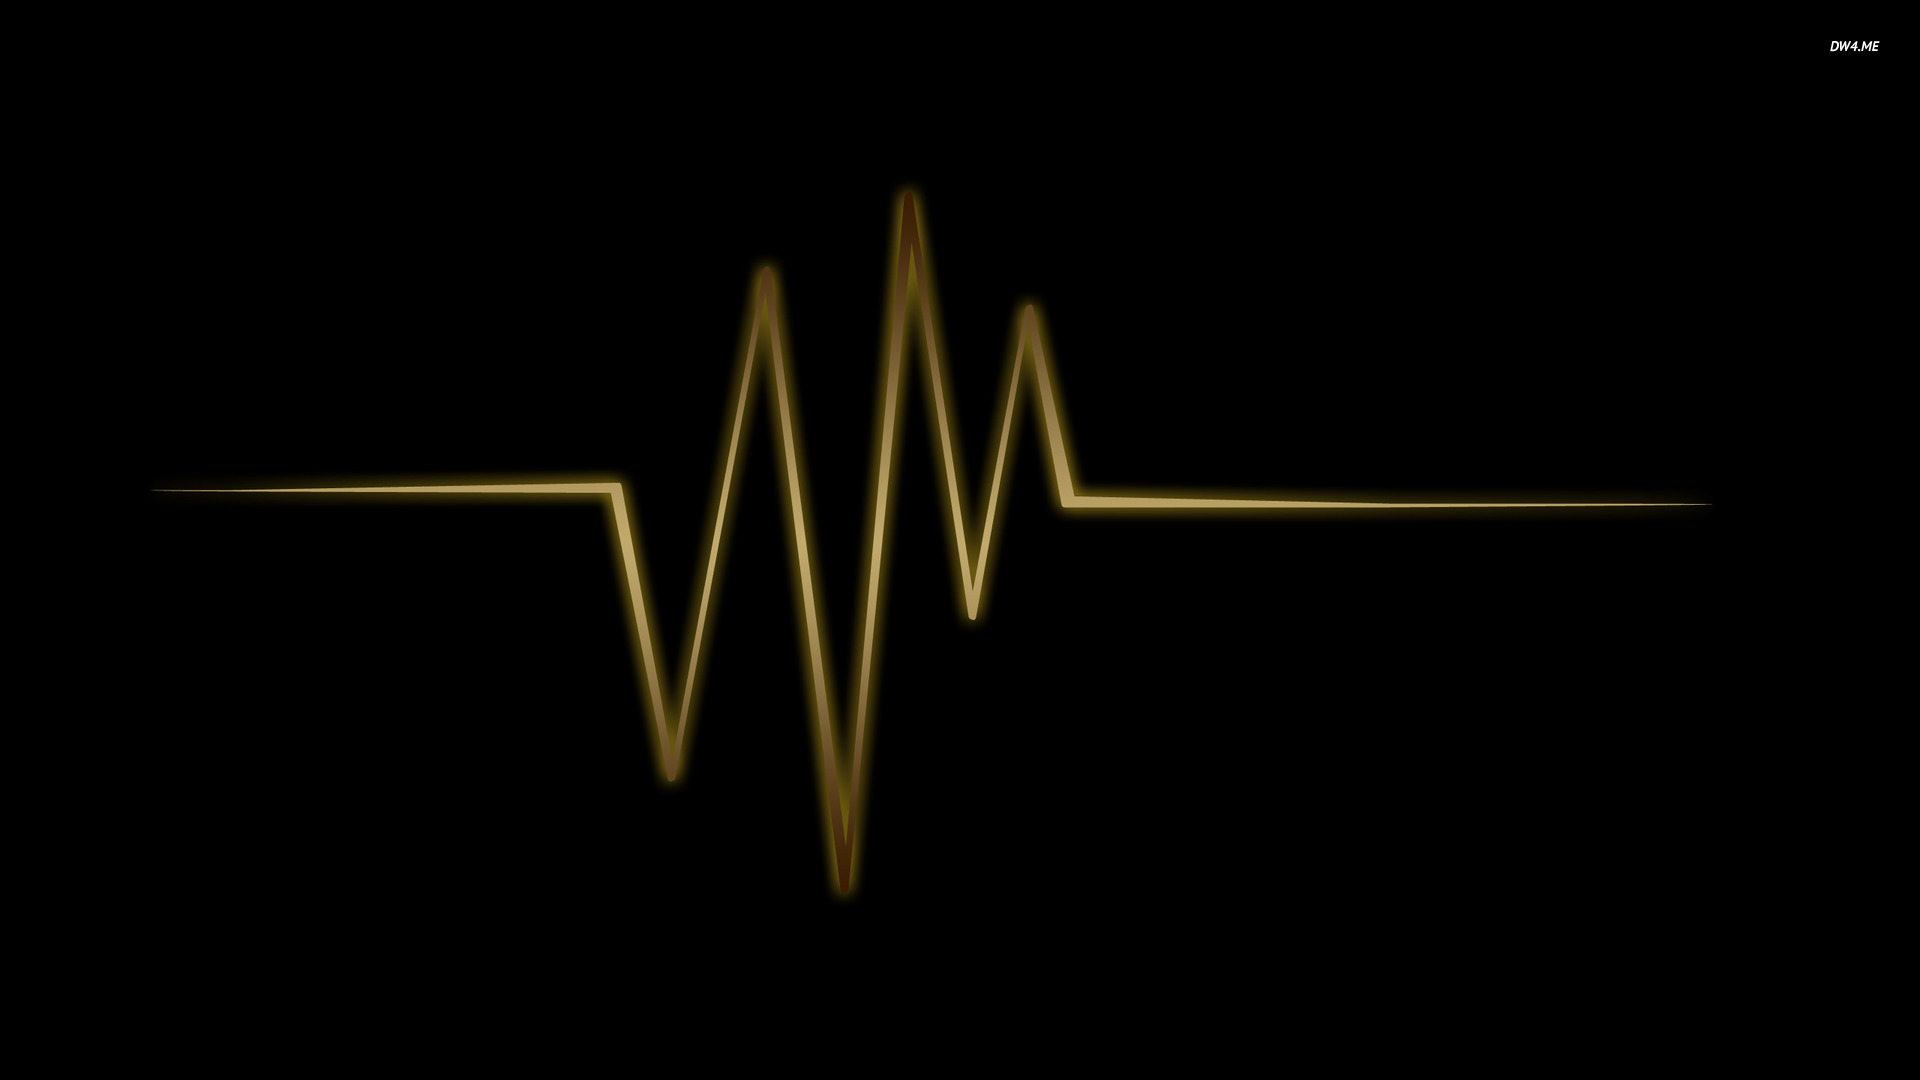 Heartbeat wallpaper   Abstract wallpapers   506